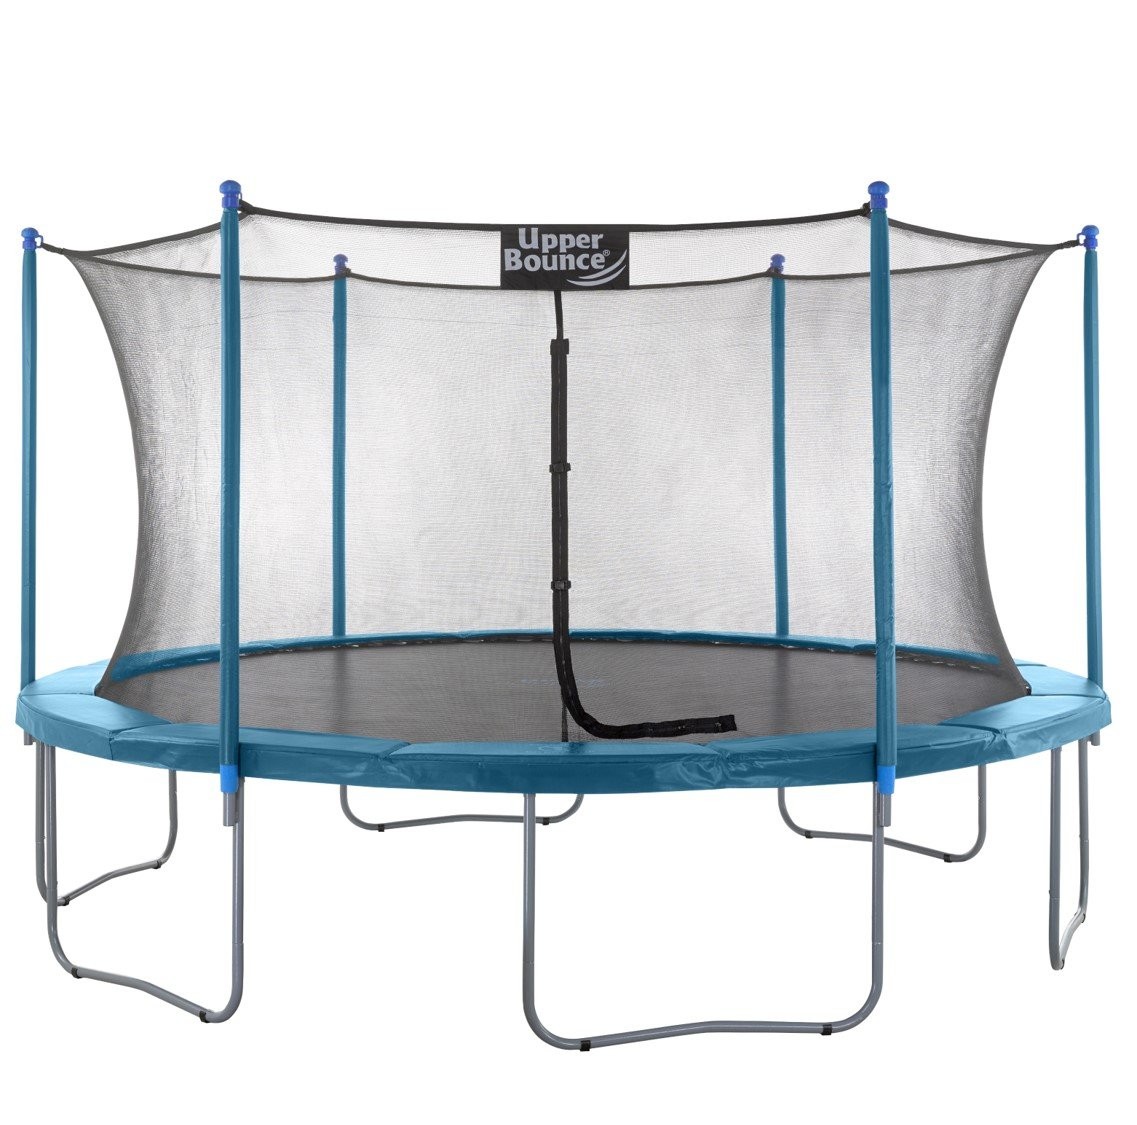 14Ft Large Trampoline and Enclosure Set | Garden & Outdoor Trampoline with Safety Net, Mat, Pad | Aquamarine